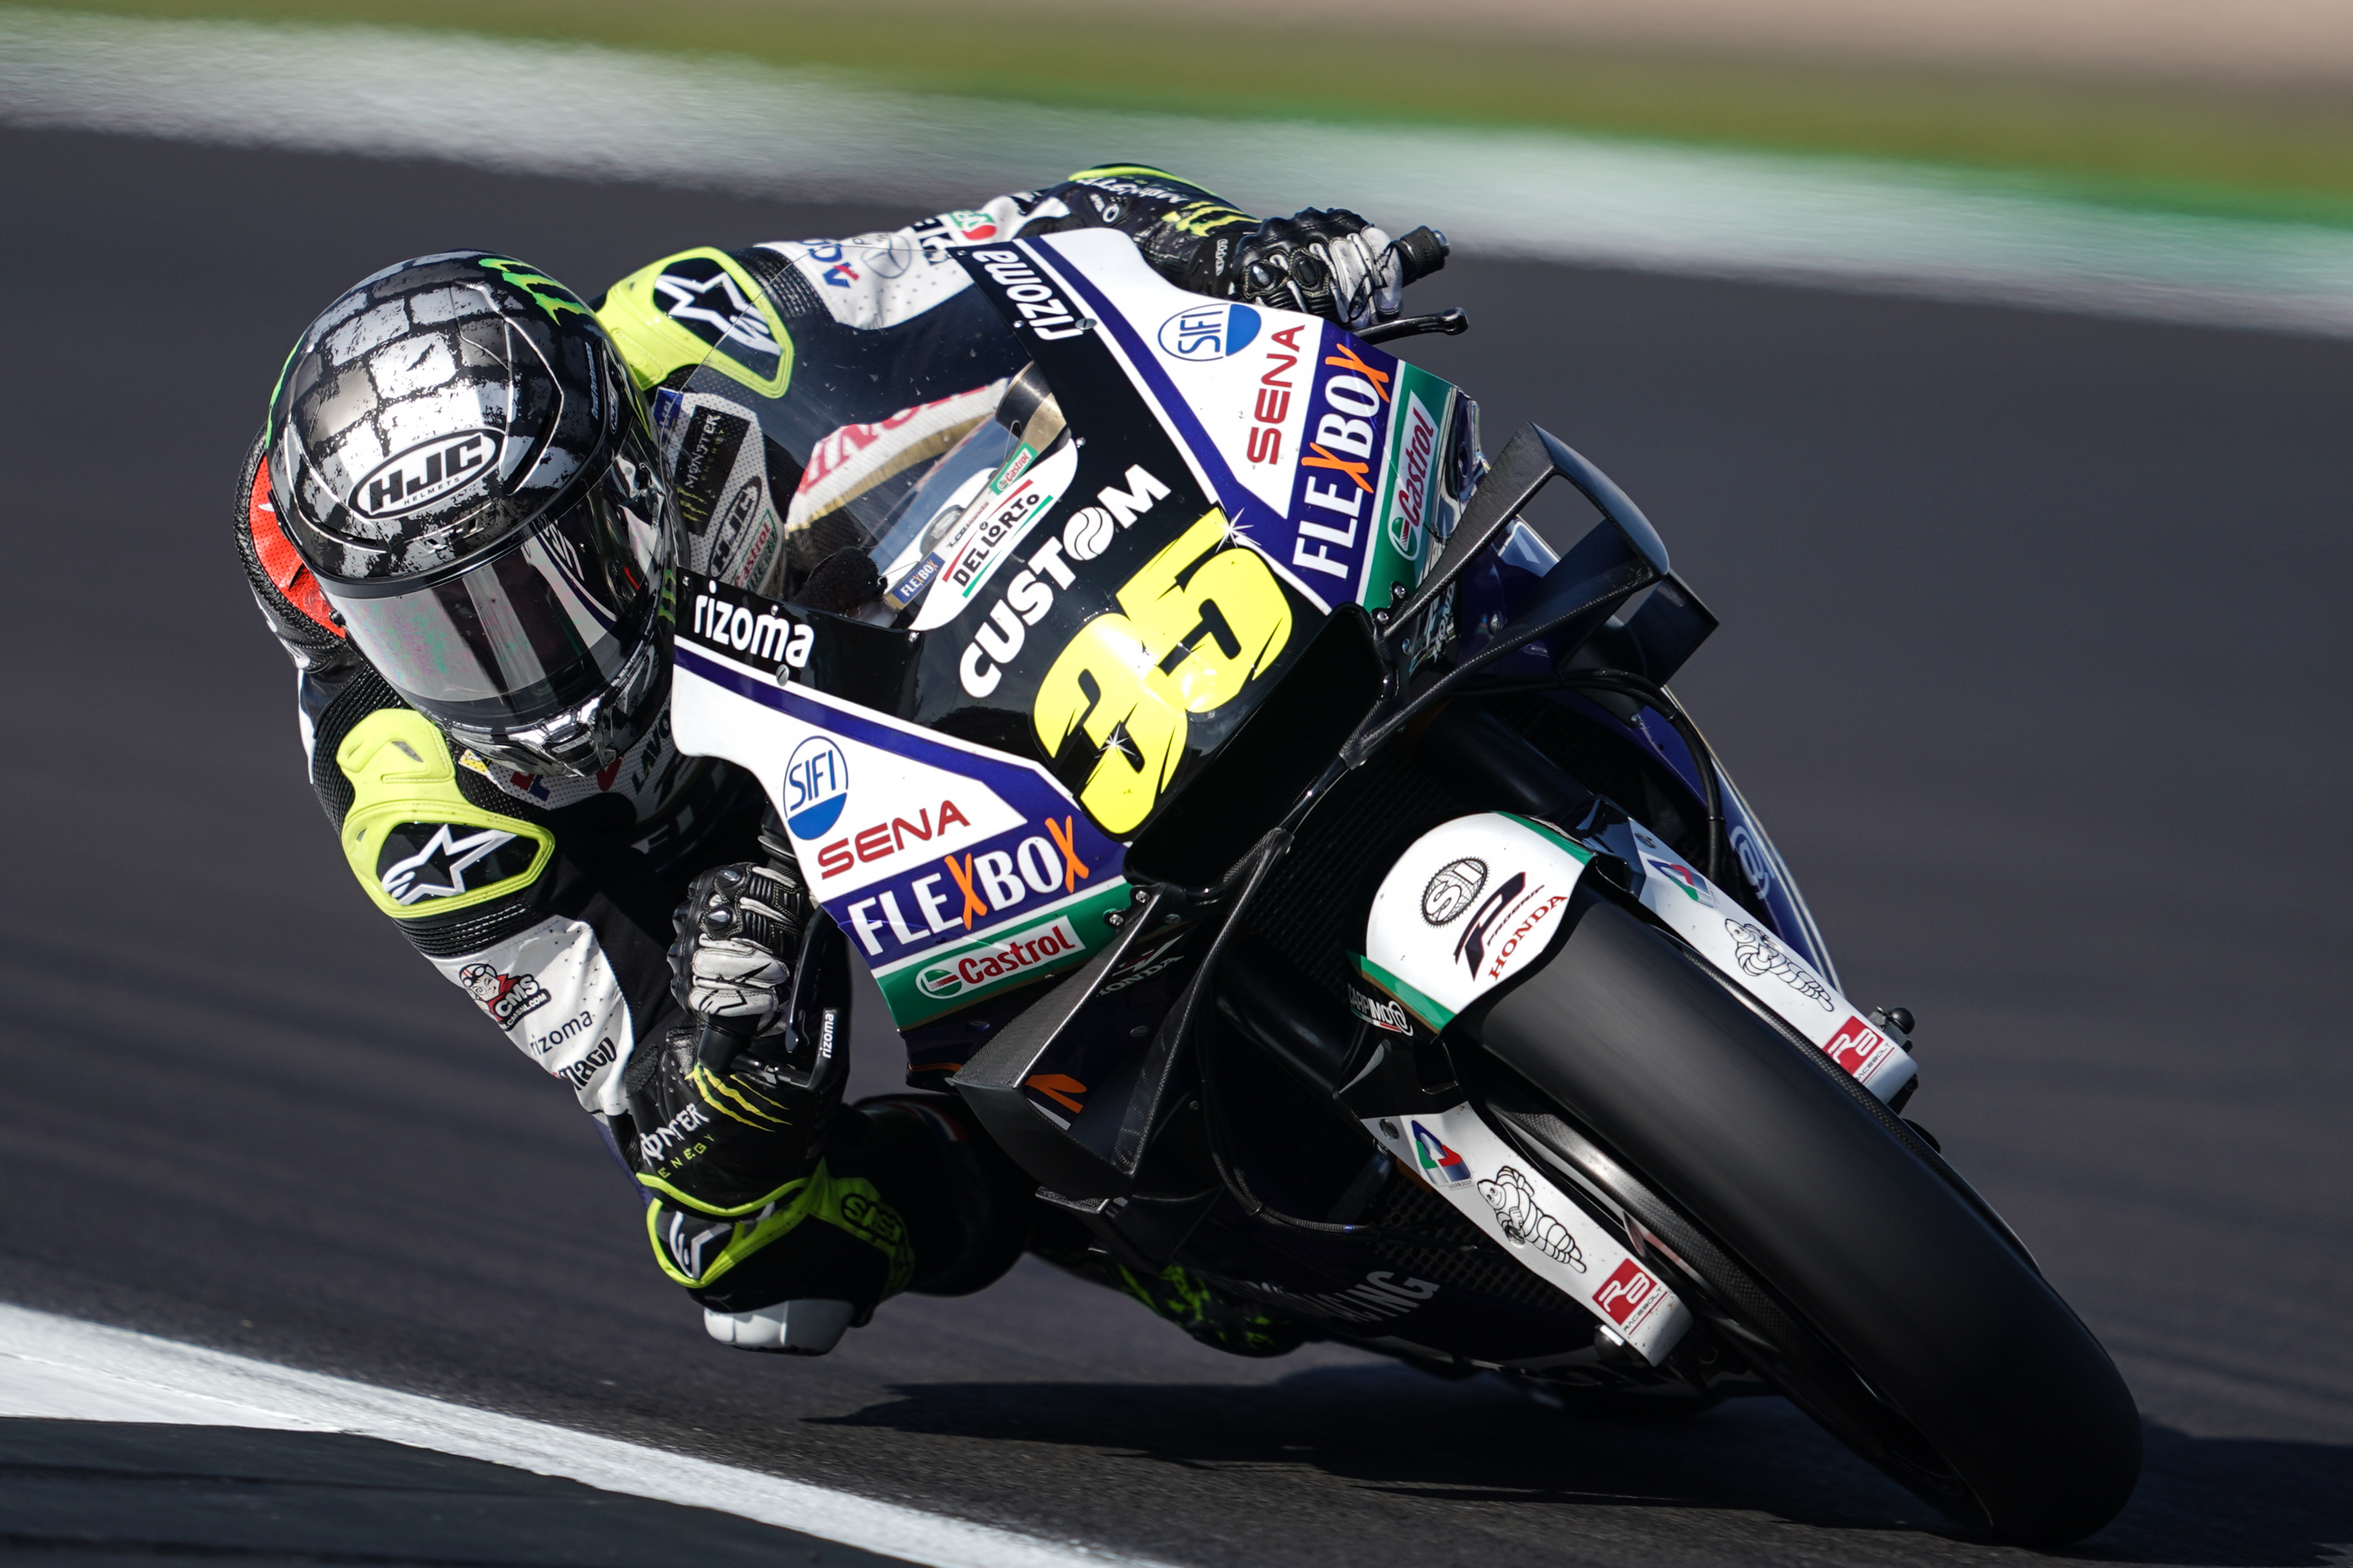 Third row start for Crutchlow at silverstone